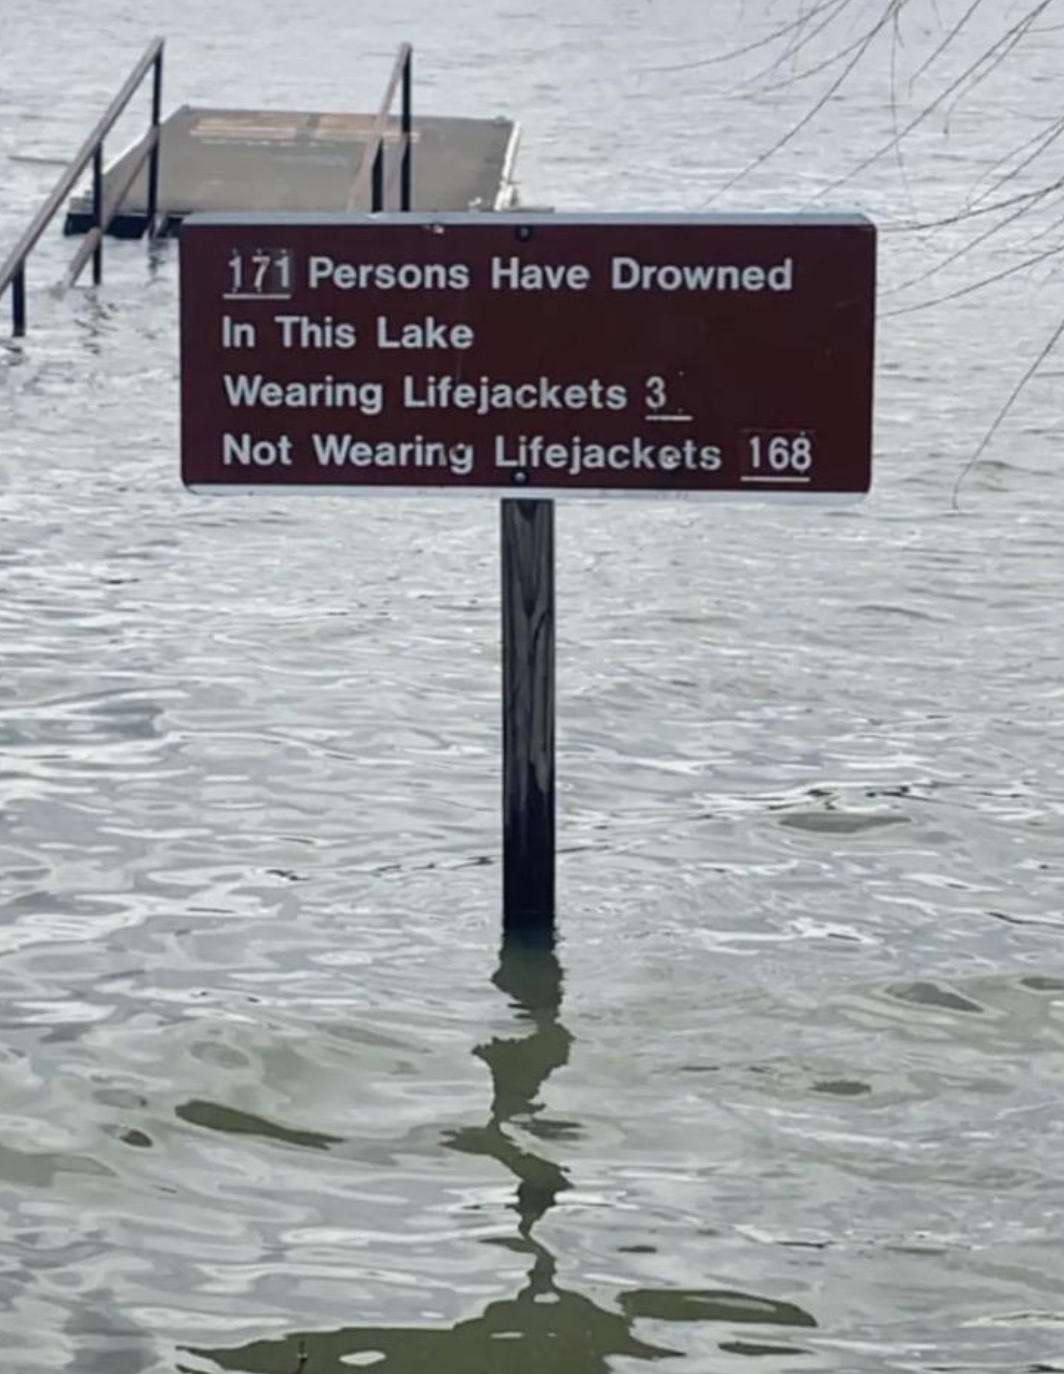 Sign partially submerged in water indicating 171 persons drowned in the lake, with 3 wearing lifejackets and 168 not